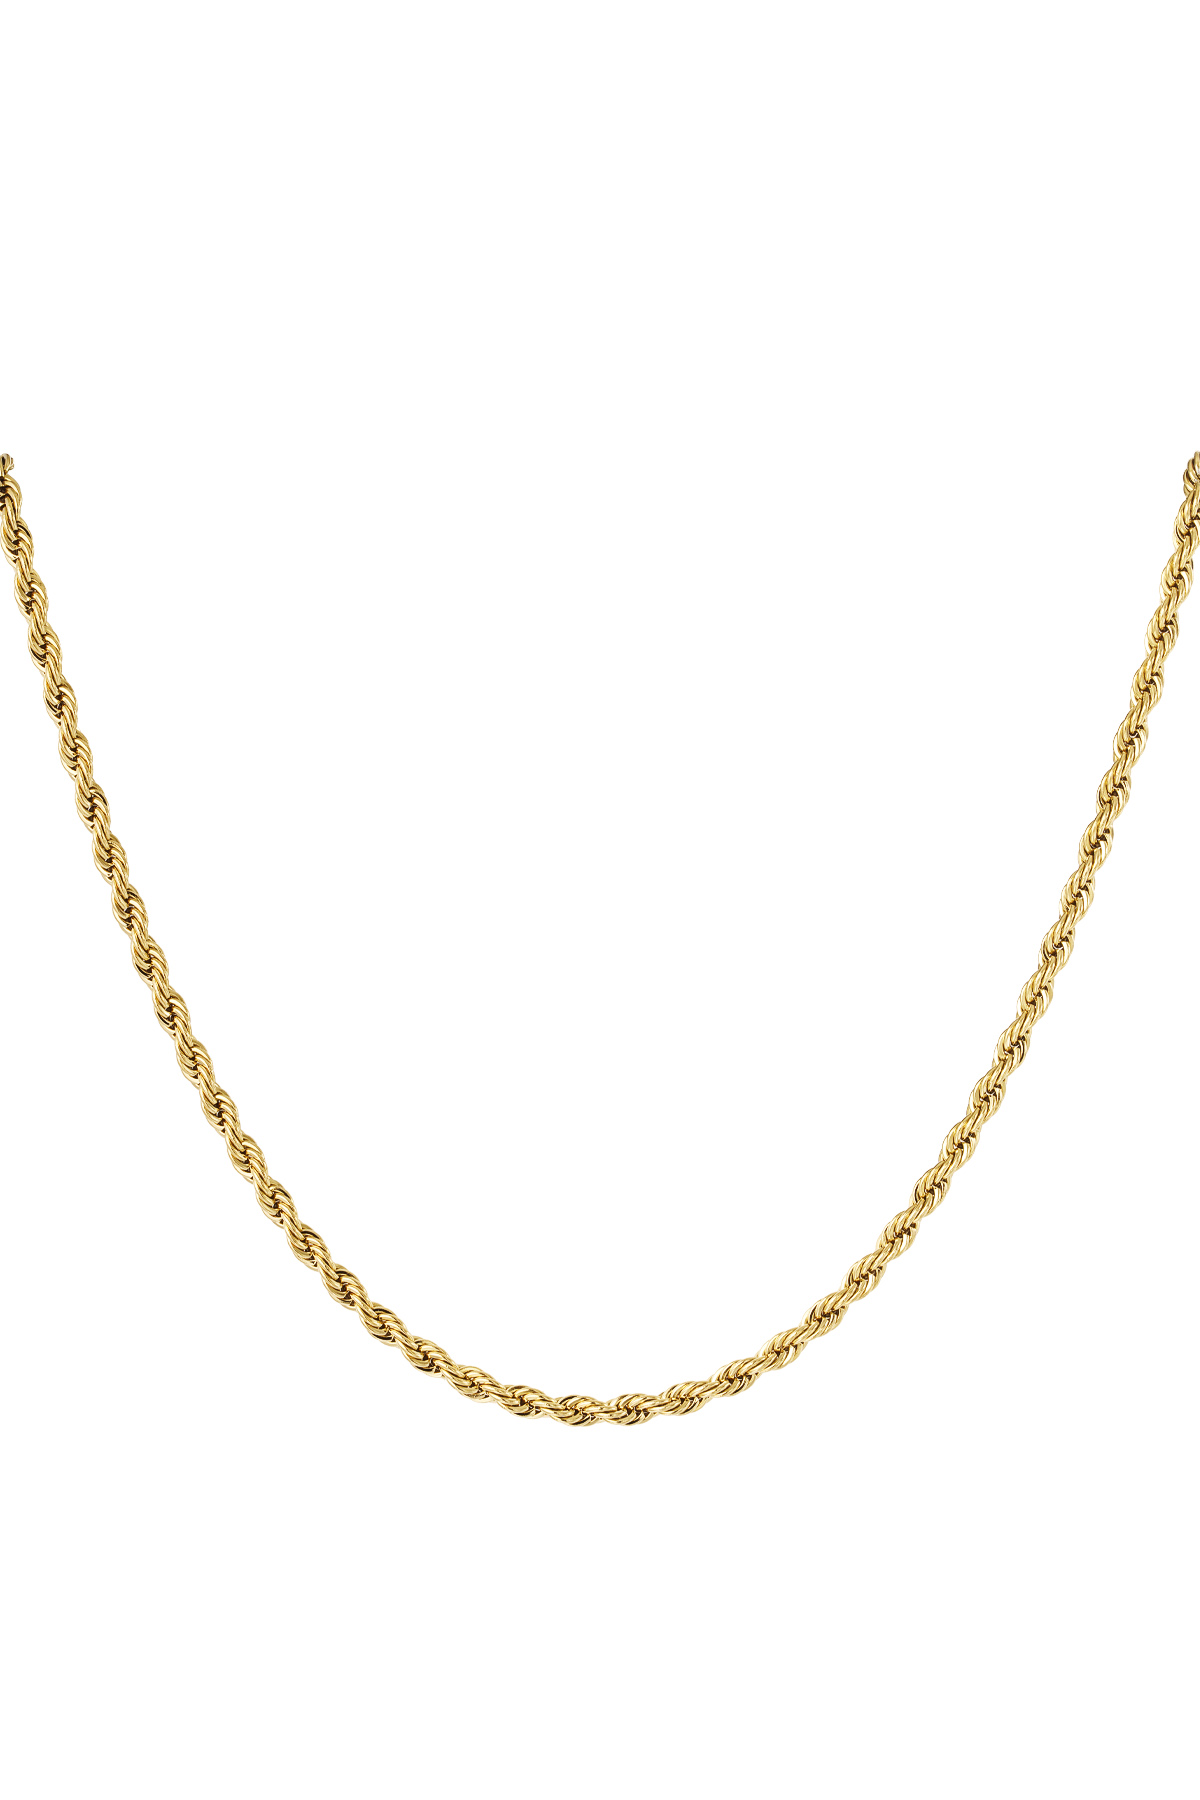 Unisex twisted necklace long 60cm - gold